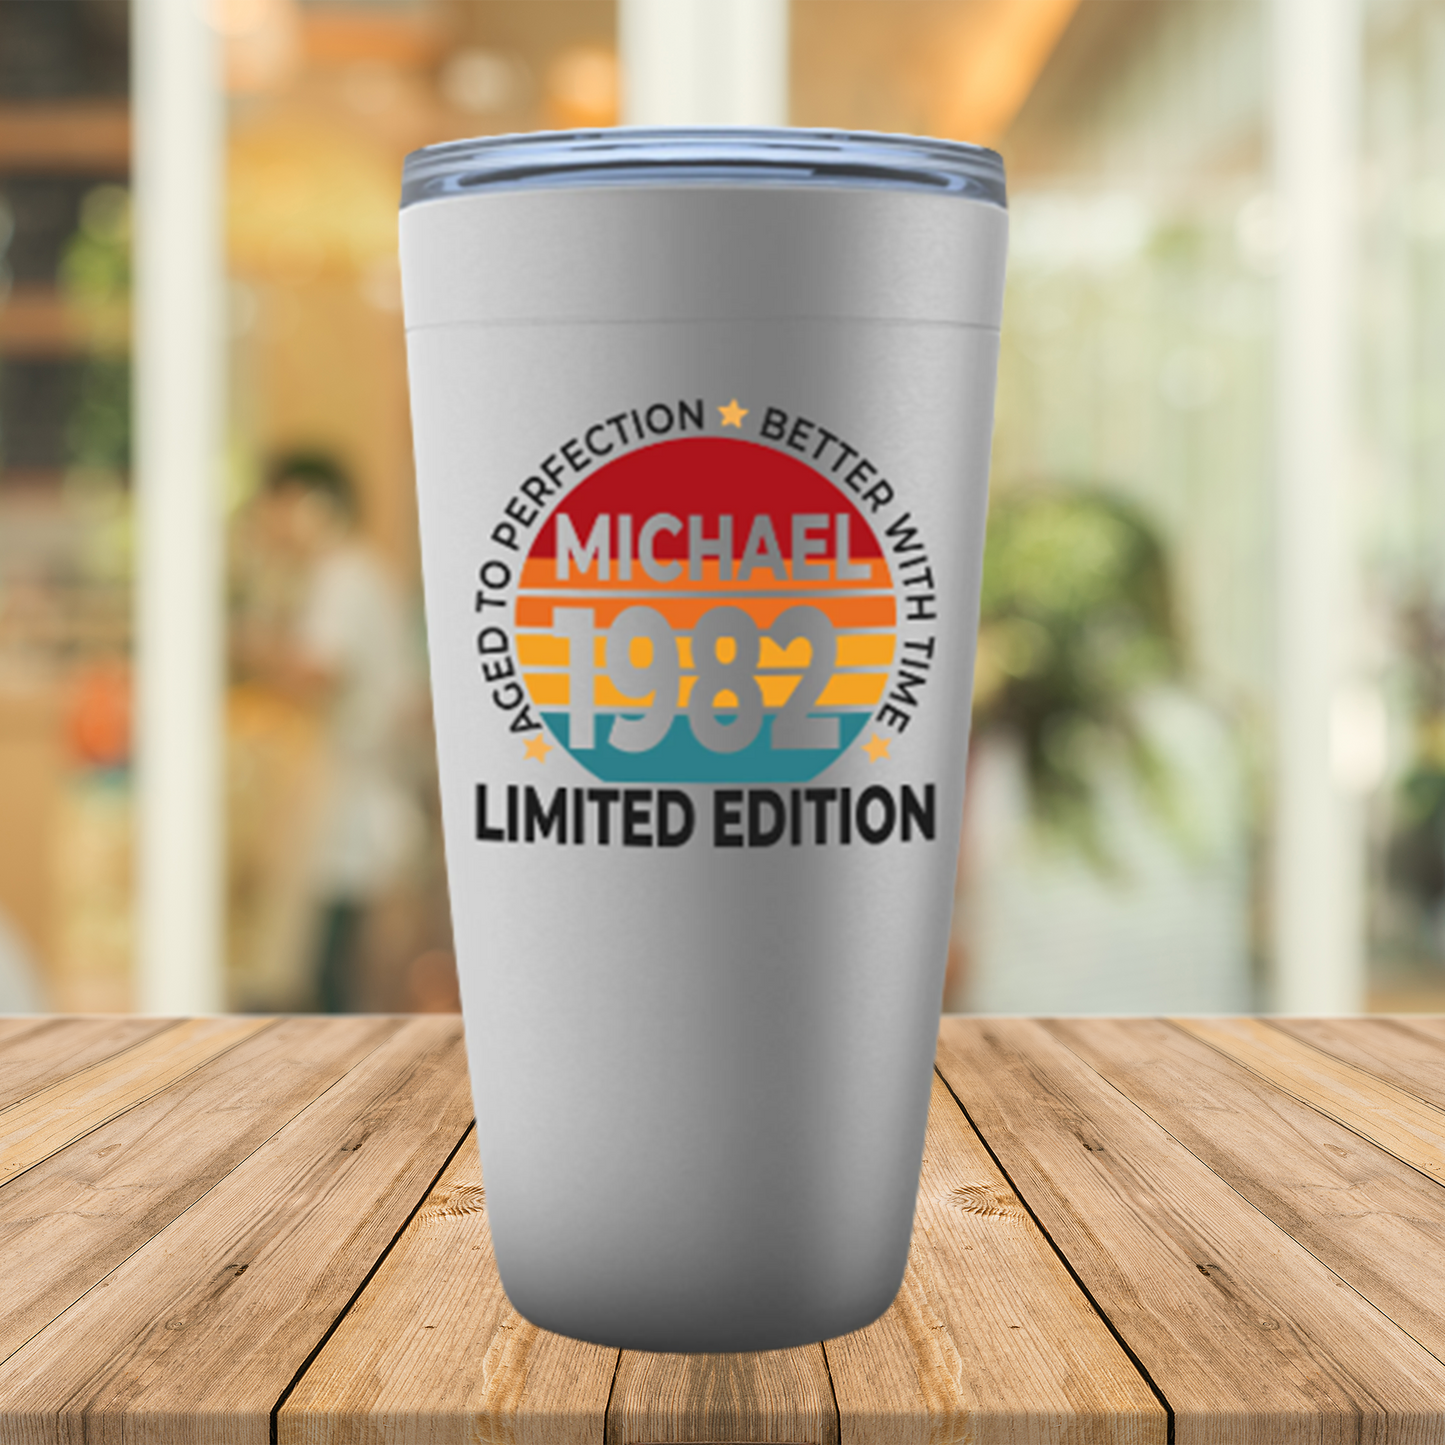 40th Birthday Tumbler Gift For Men, Limited Edition 1982 Custom Party Cup, Fortieth Birthday Present Idea For Husband, Son, Friend, Brother